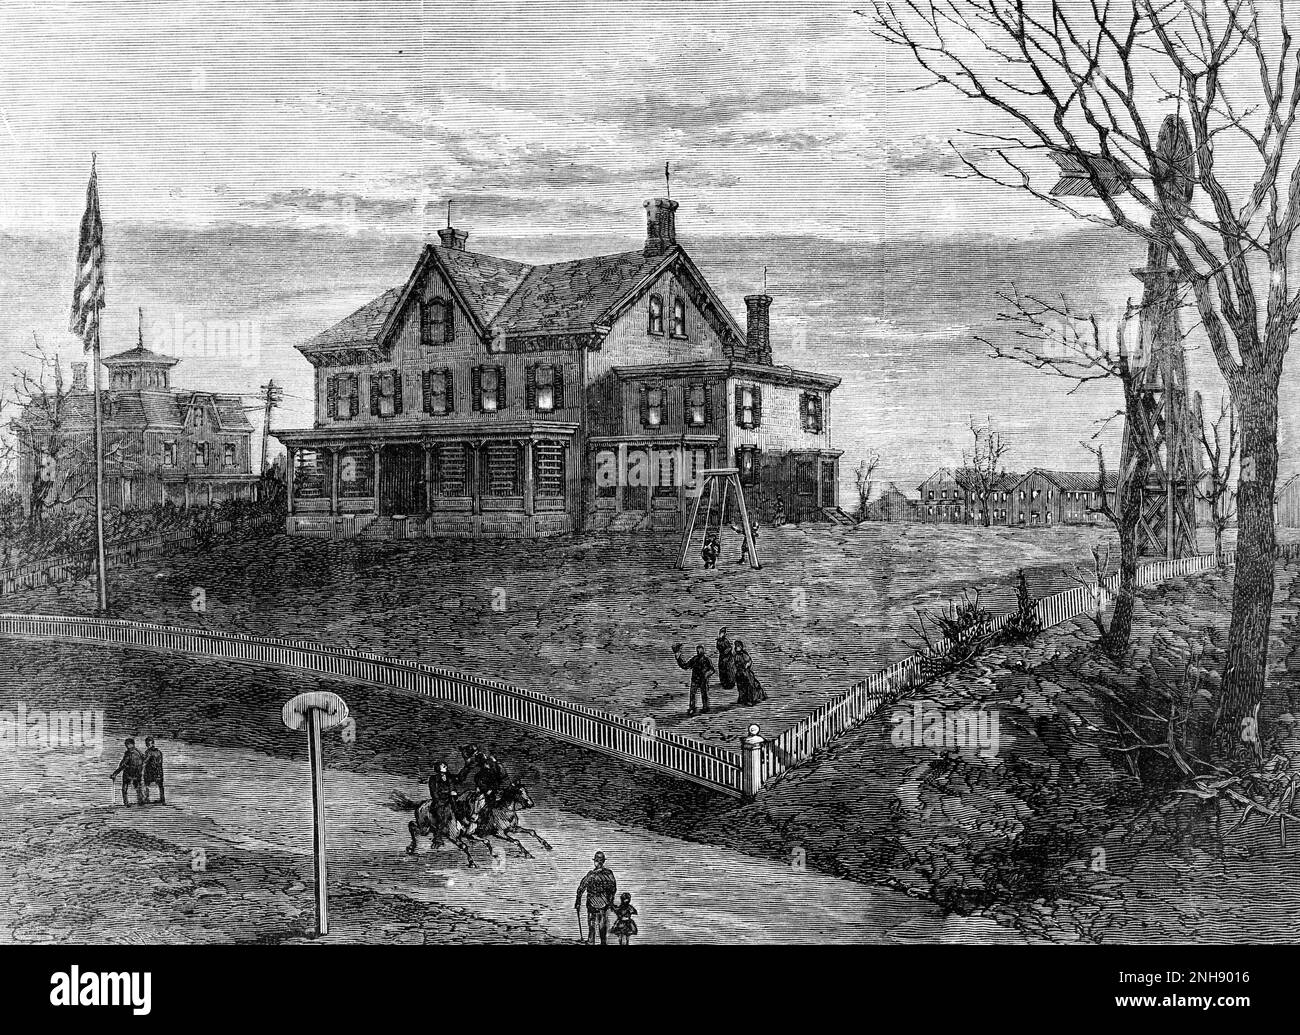 The house of inventor Thomas Edison in Menlo Park, New Jersey. From a sketch by Theodore R. Davis from Harper's Weekly, 1880. Stock Photo